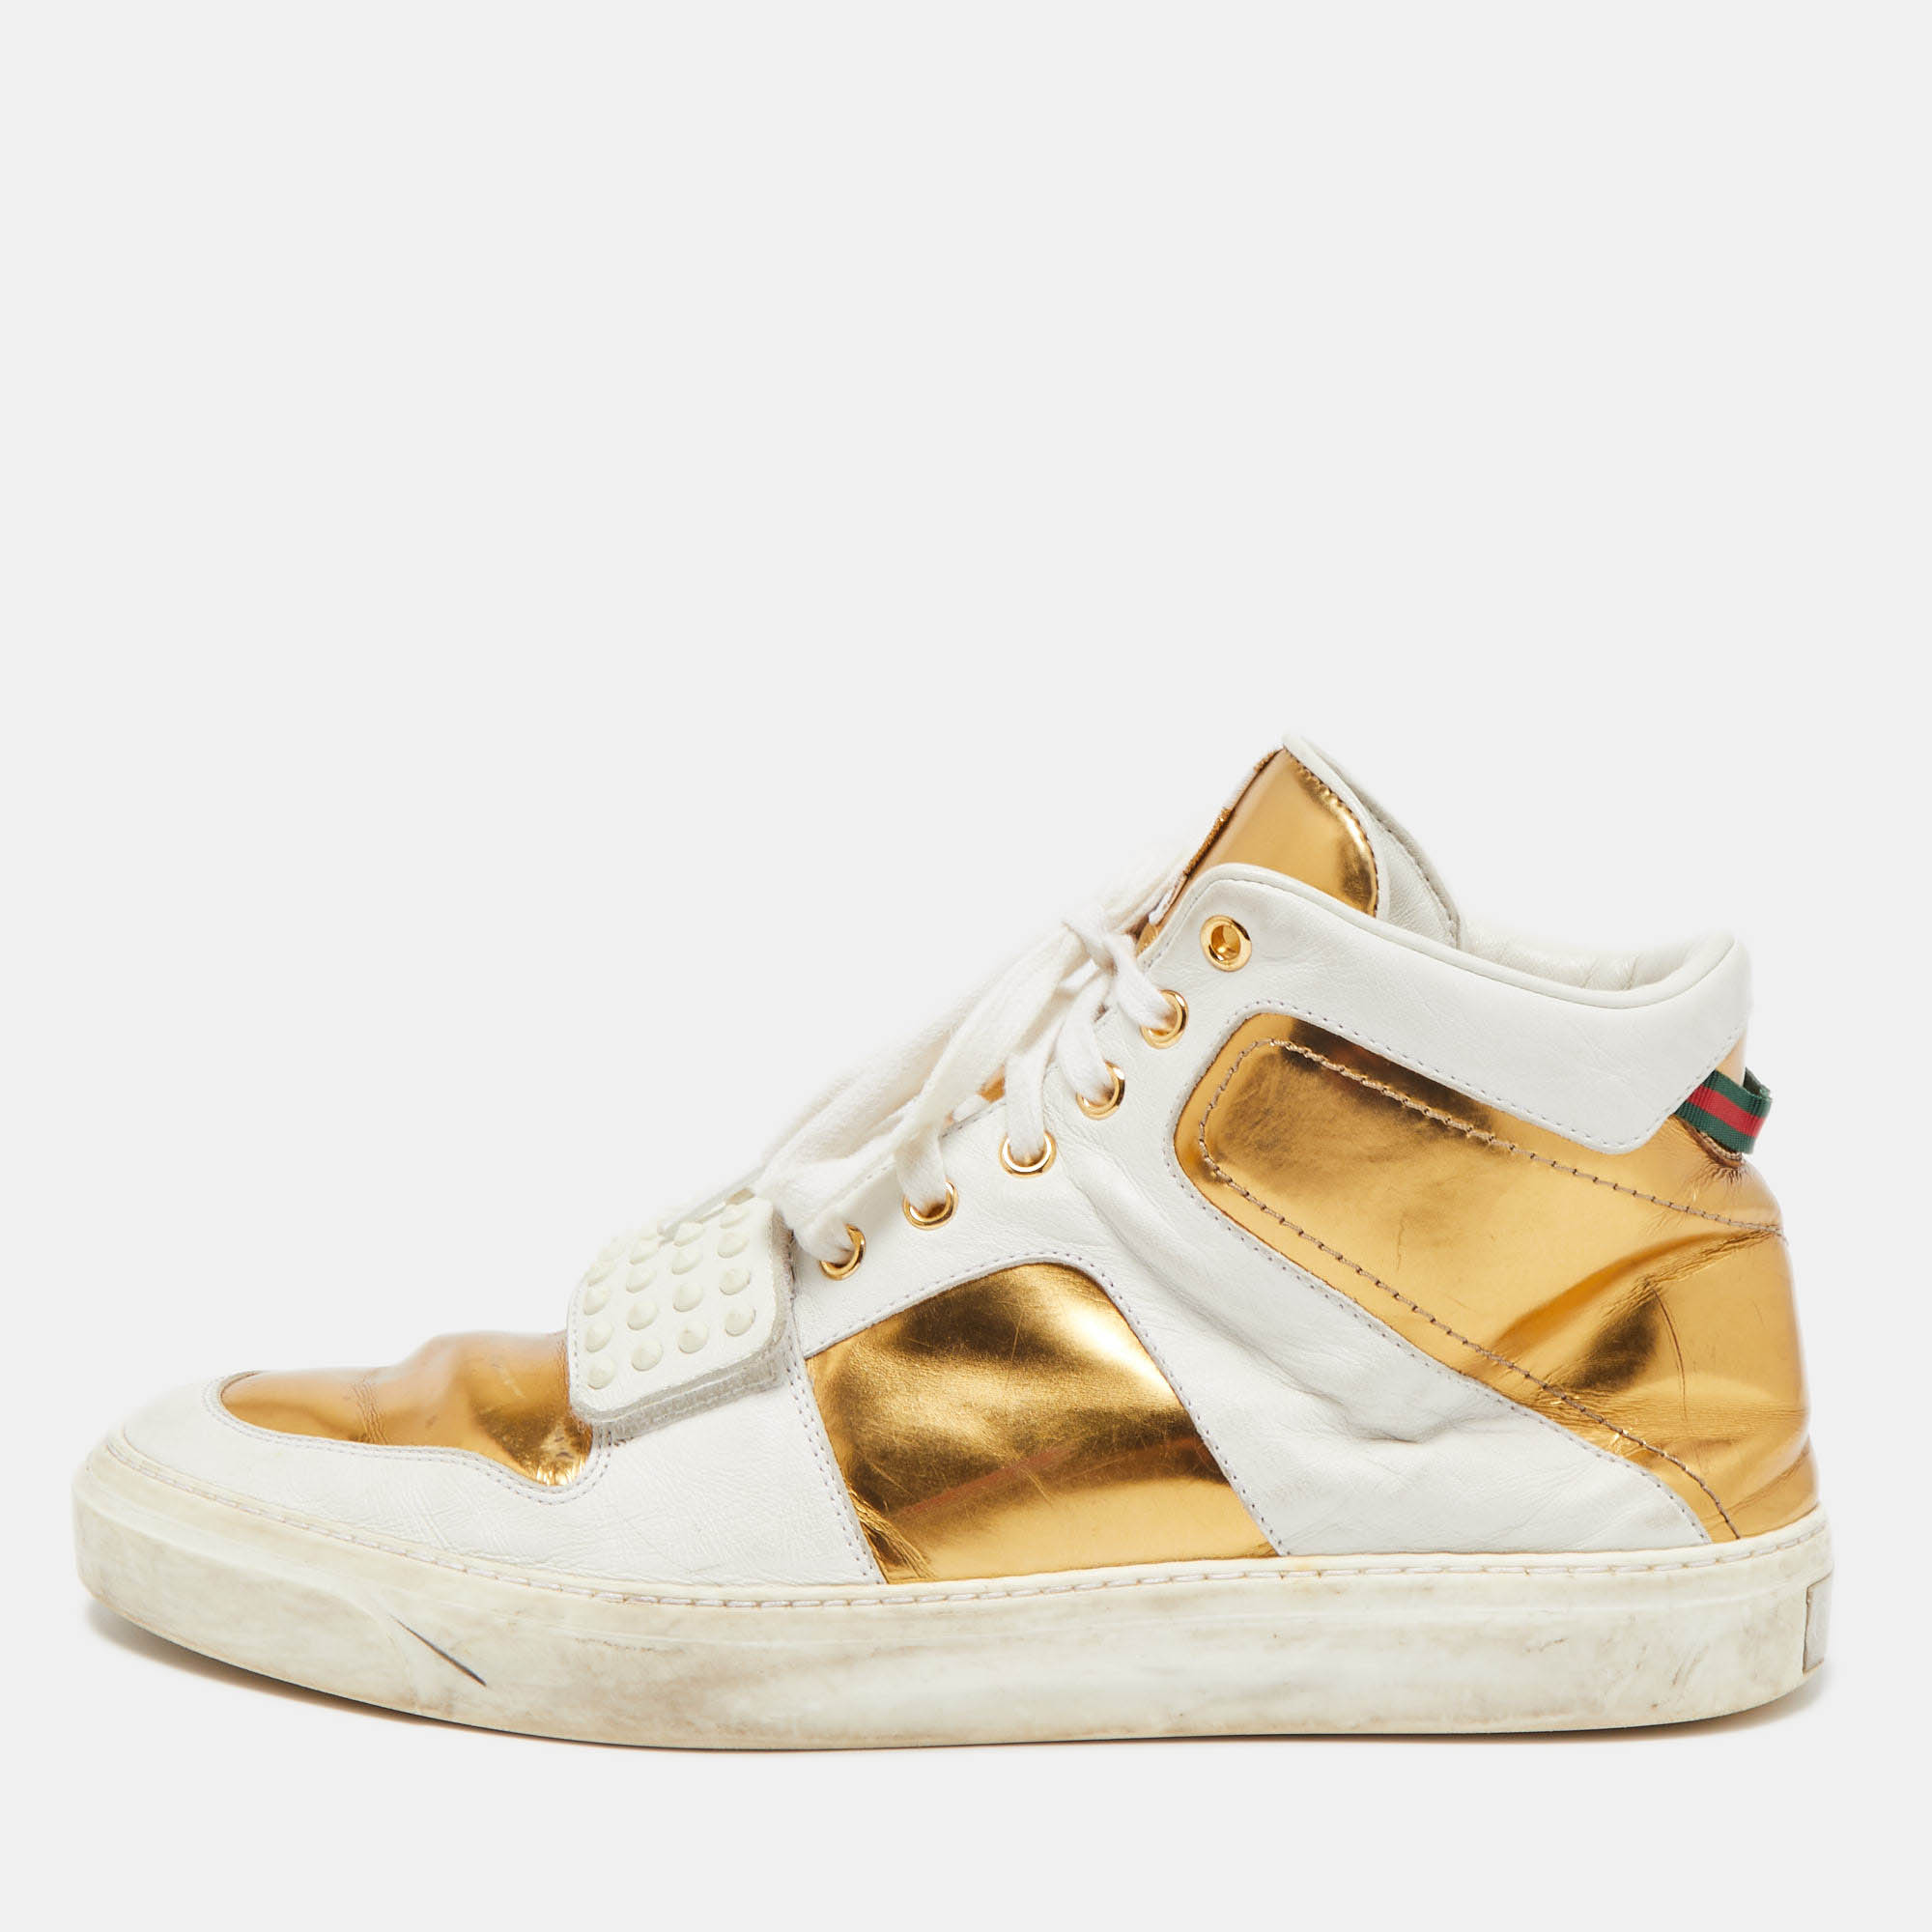 Gucci white/gold leather lace up high top sneakers size 44